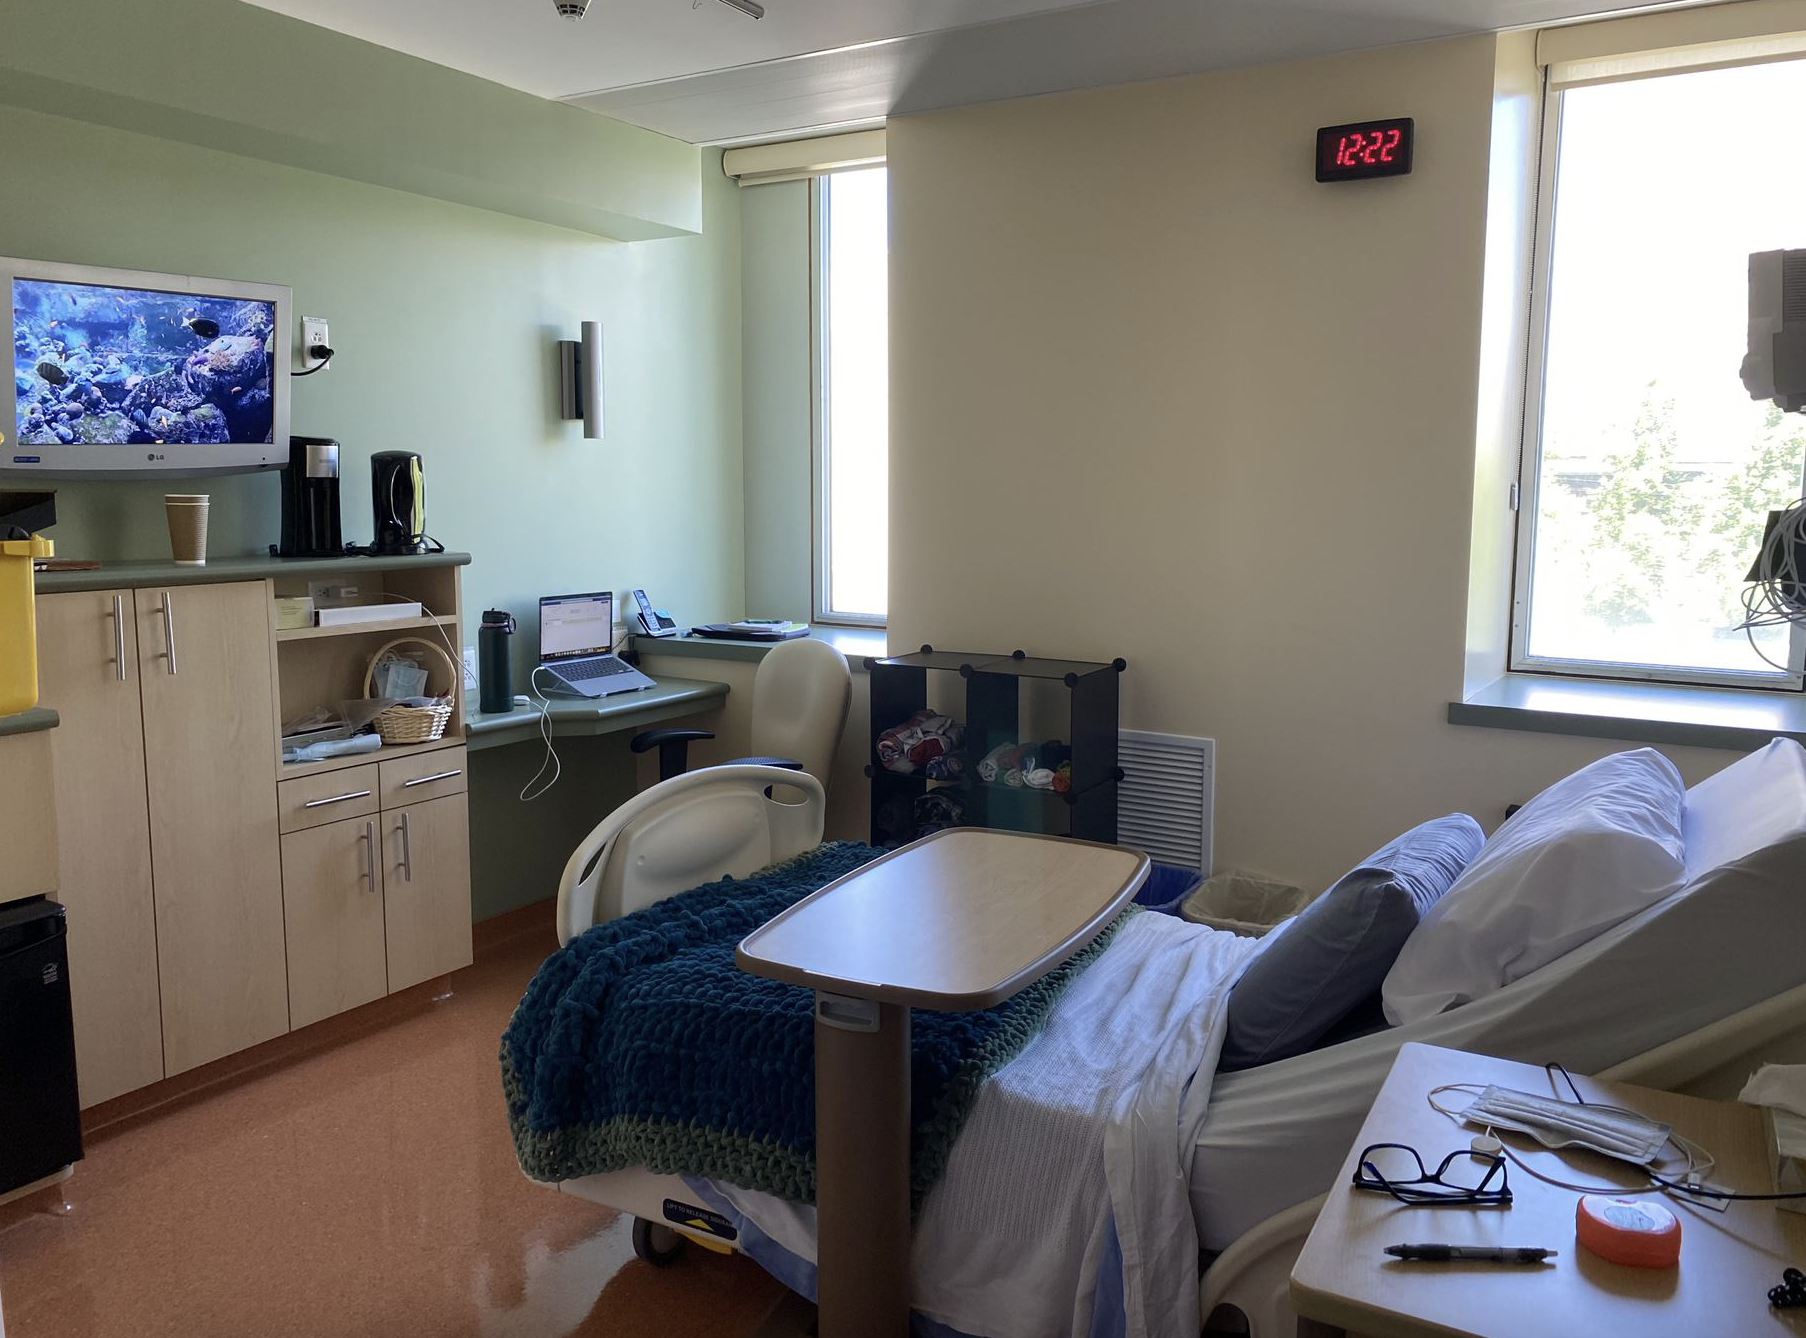 A hospital room with a bed, TV on with screen saver and various items like eyeglasses, cups, and headphones showing someone is inhabiting the room.